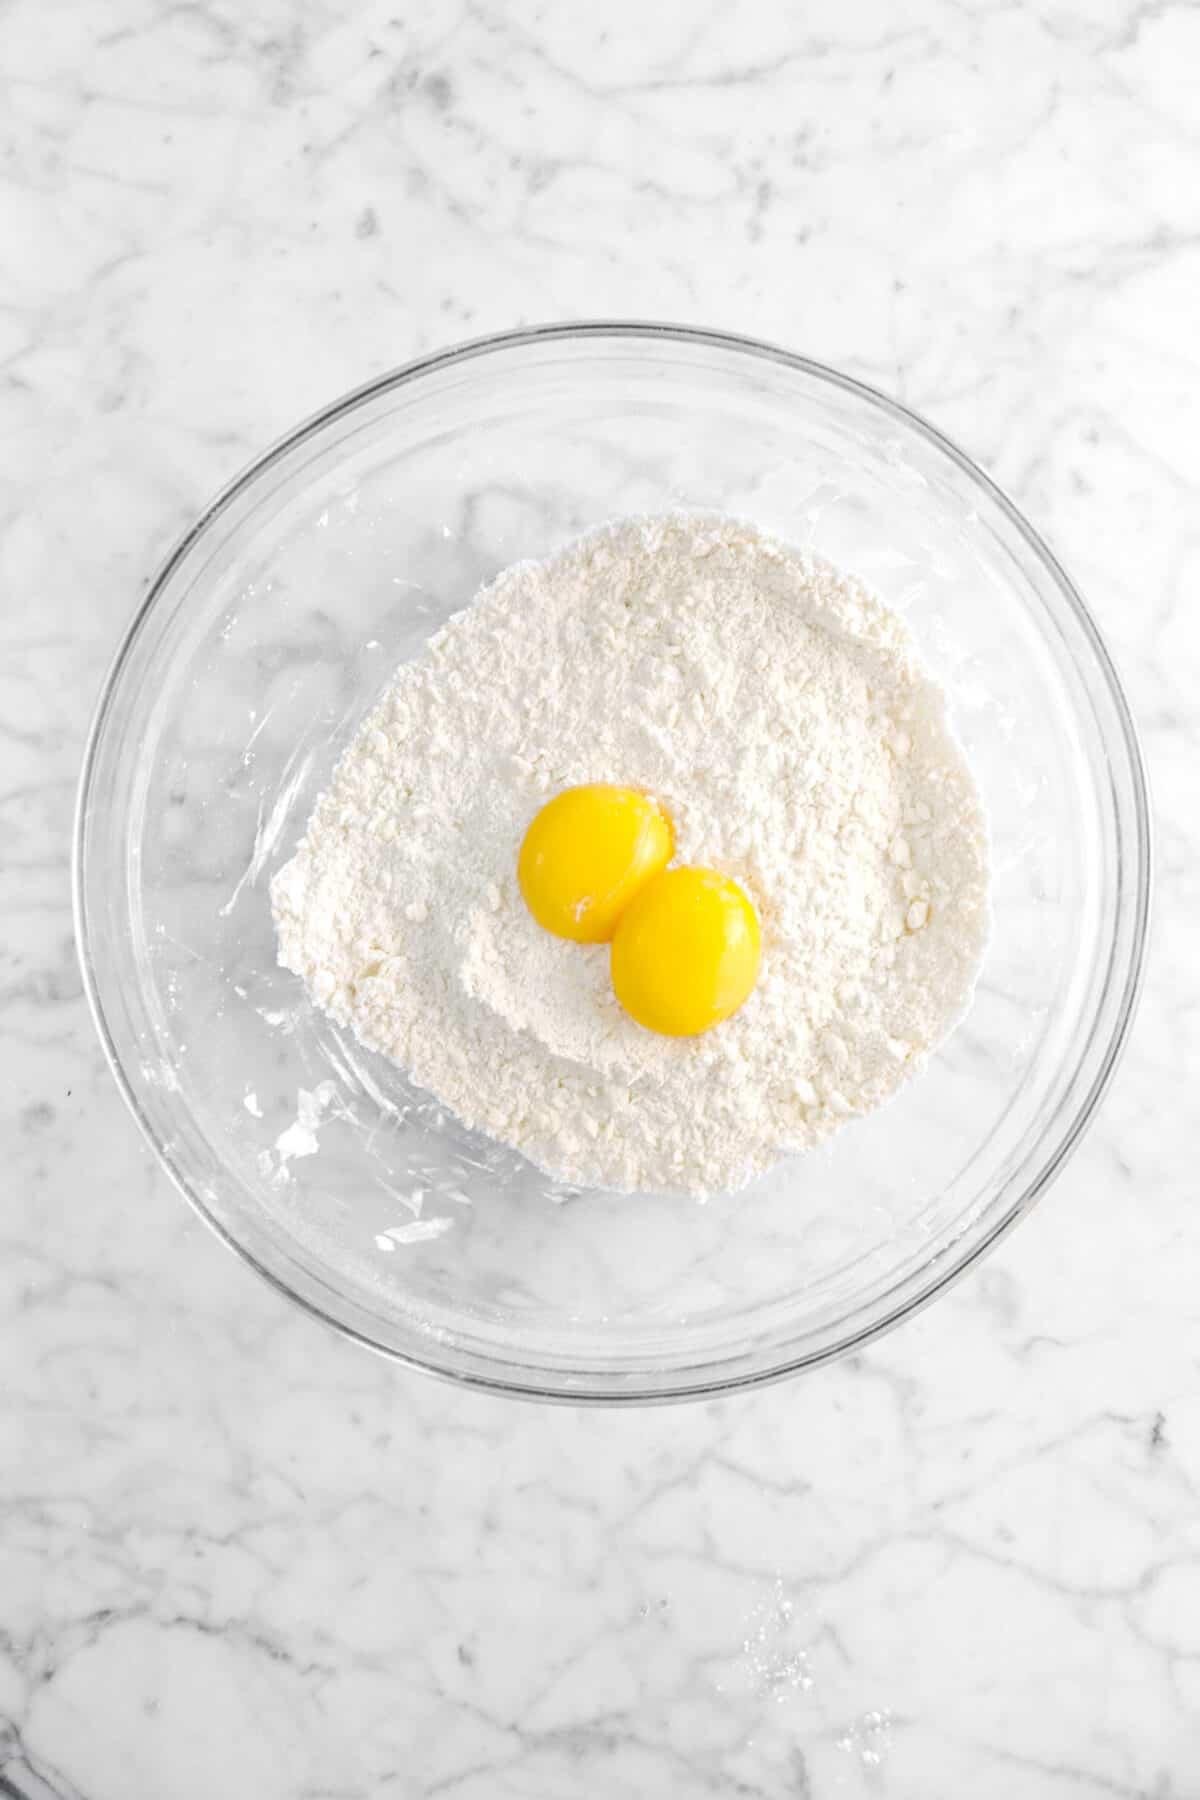 eggs added to butter and flour mixture